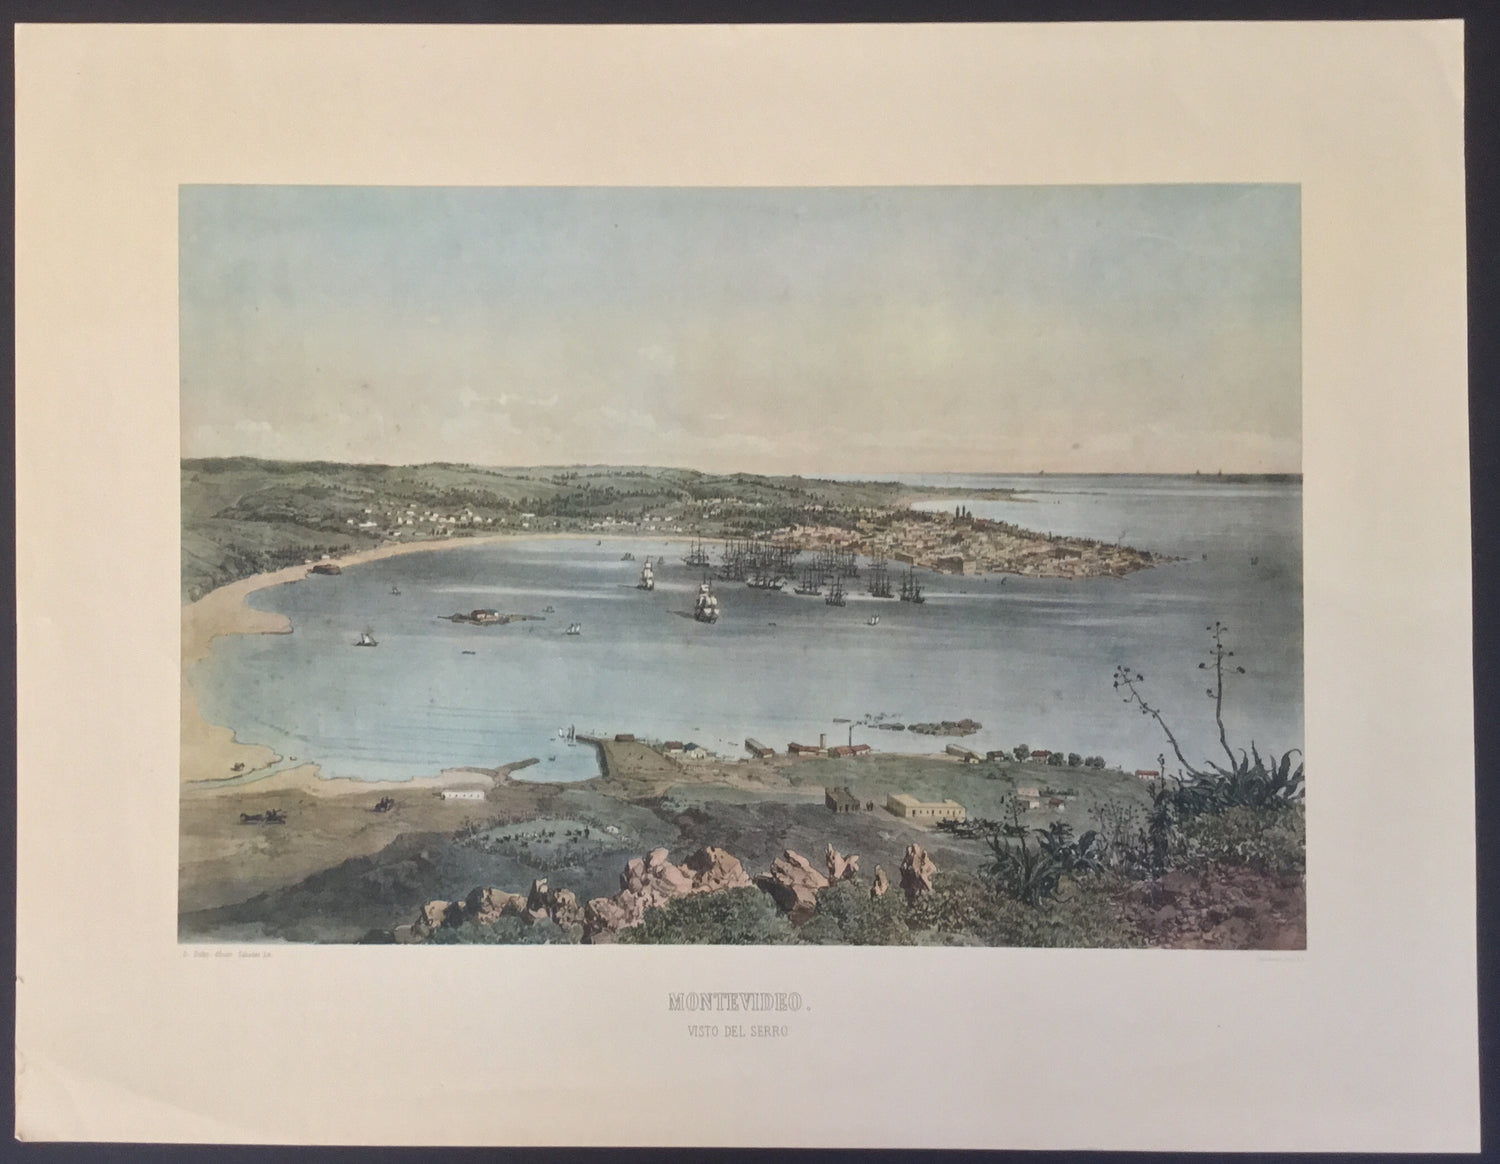 Special: Montevideo, lithograph, 17 3/4 x 23